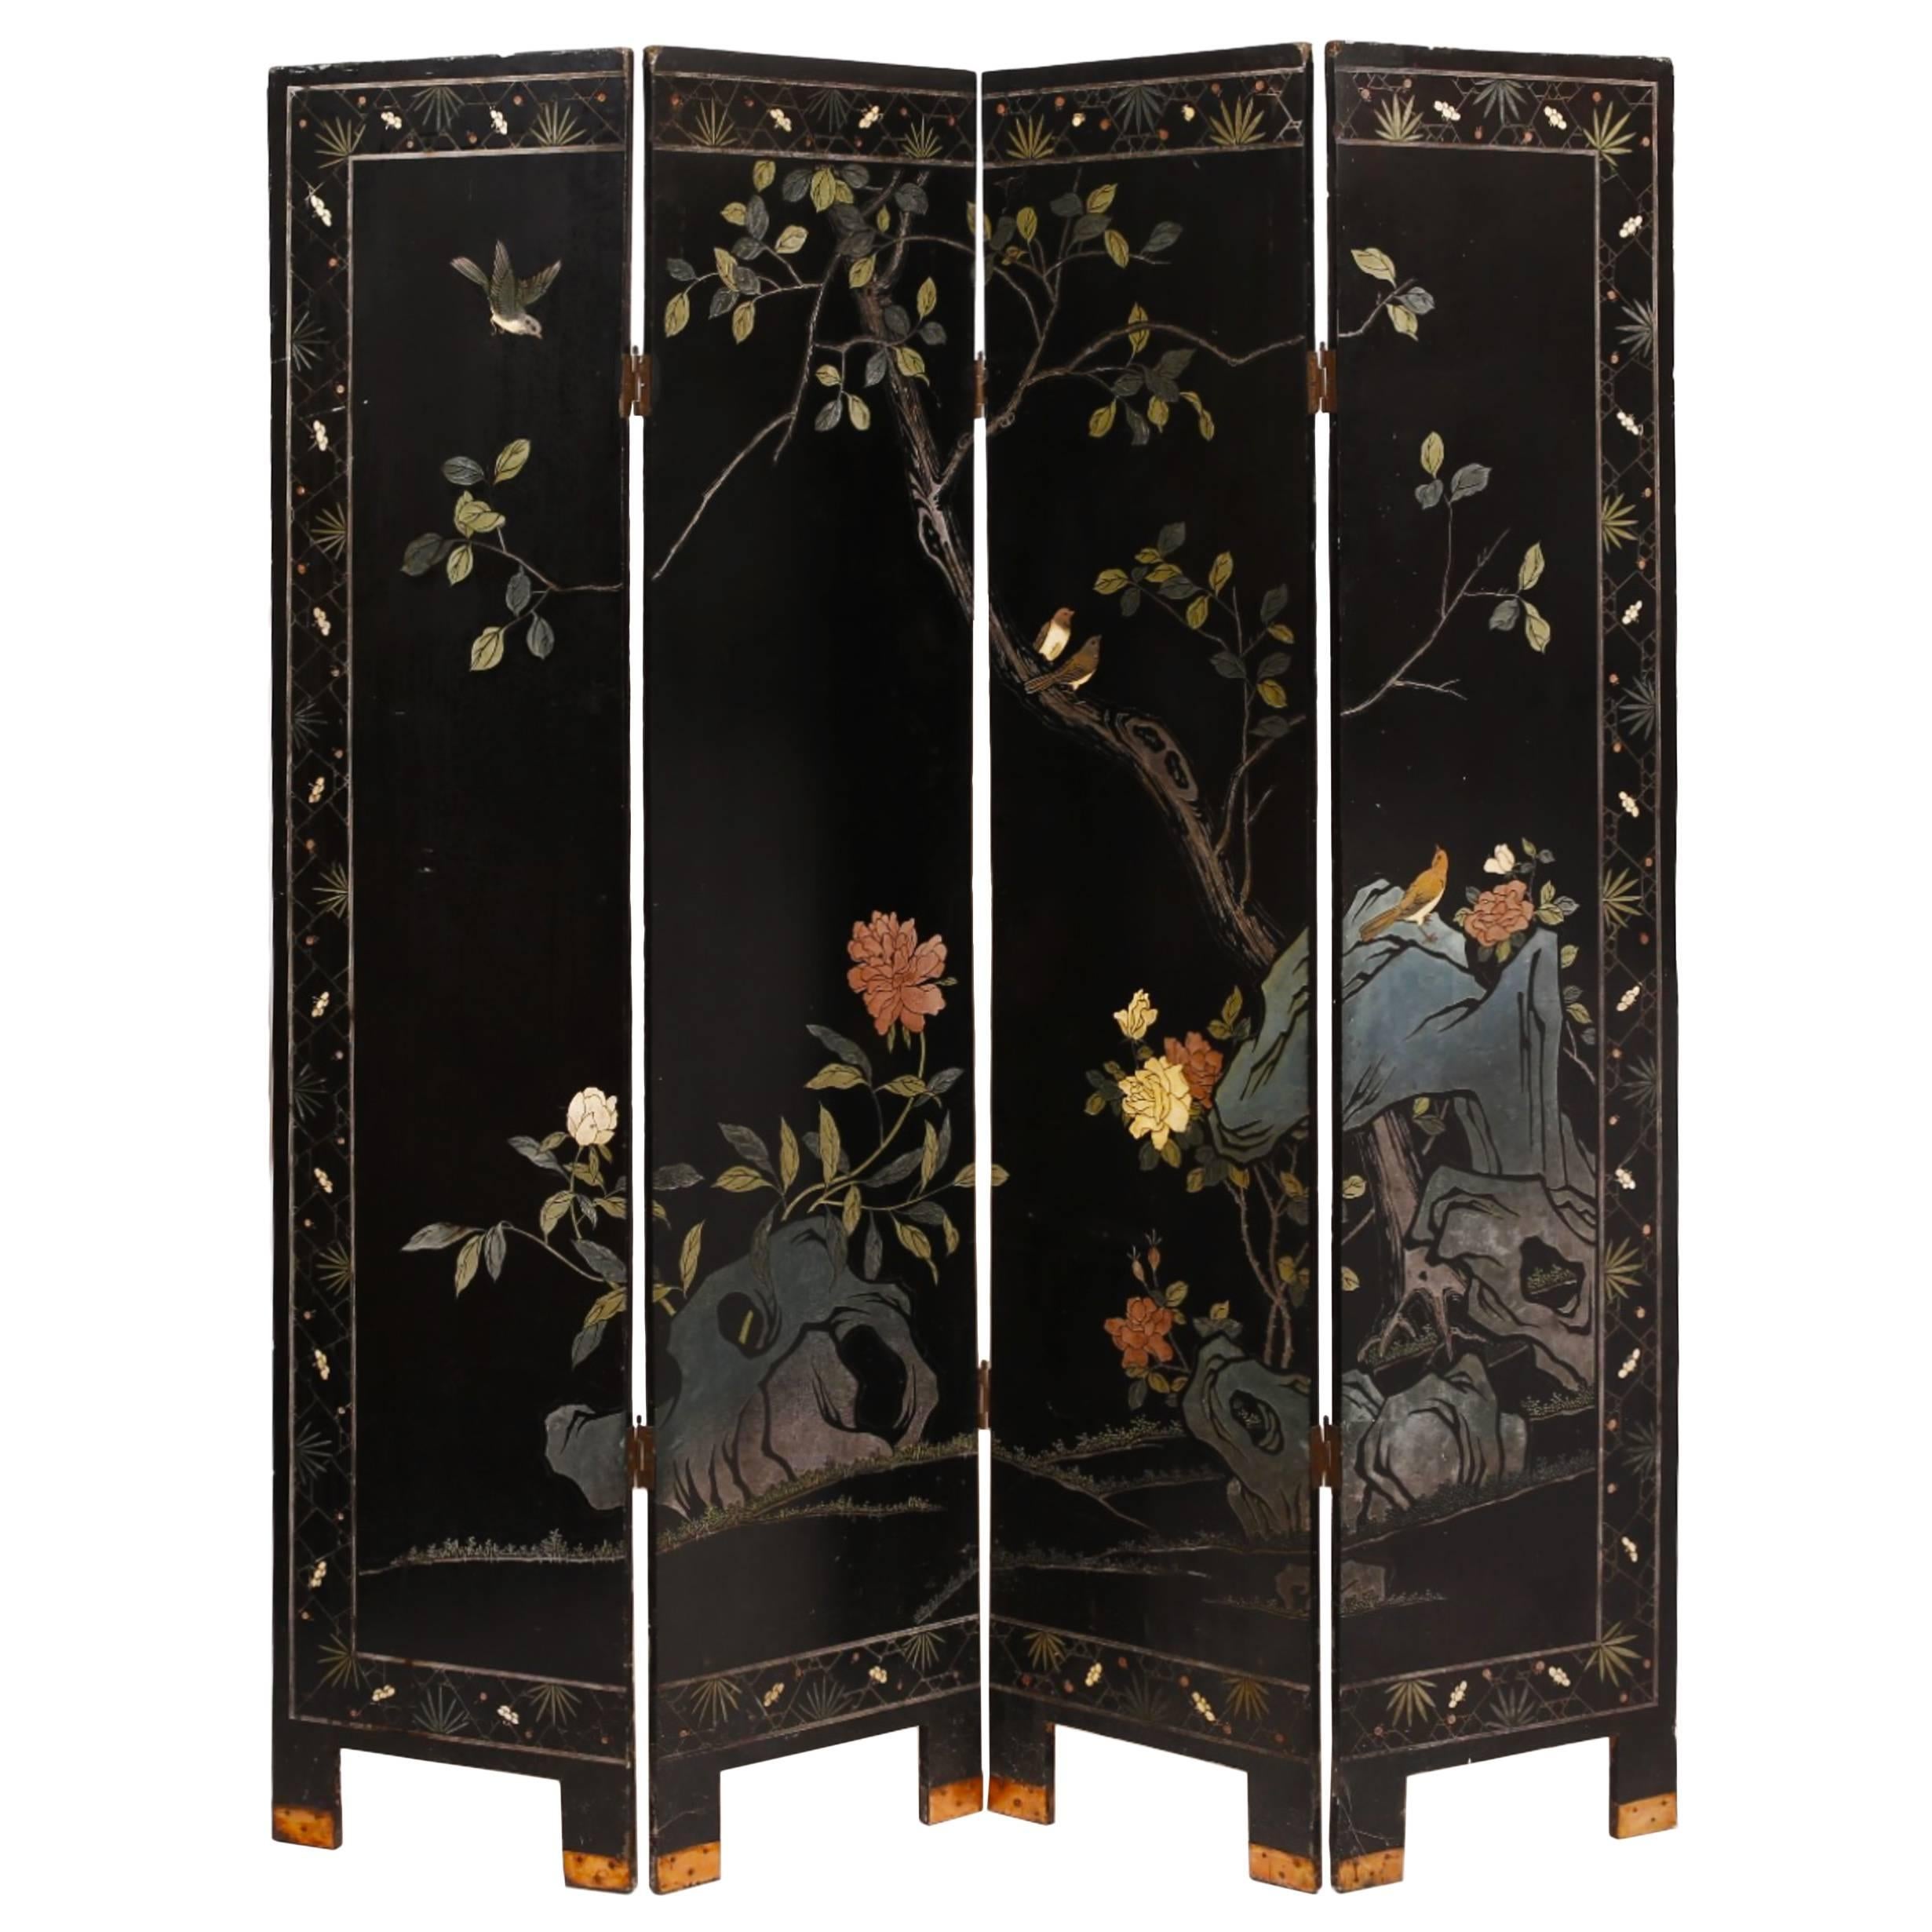 Antique Chinese 19th Century Black Lacquer Gilt Polychrome Four-Panel Screen 1